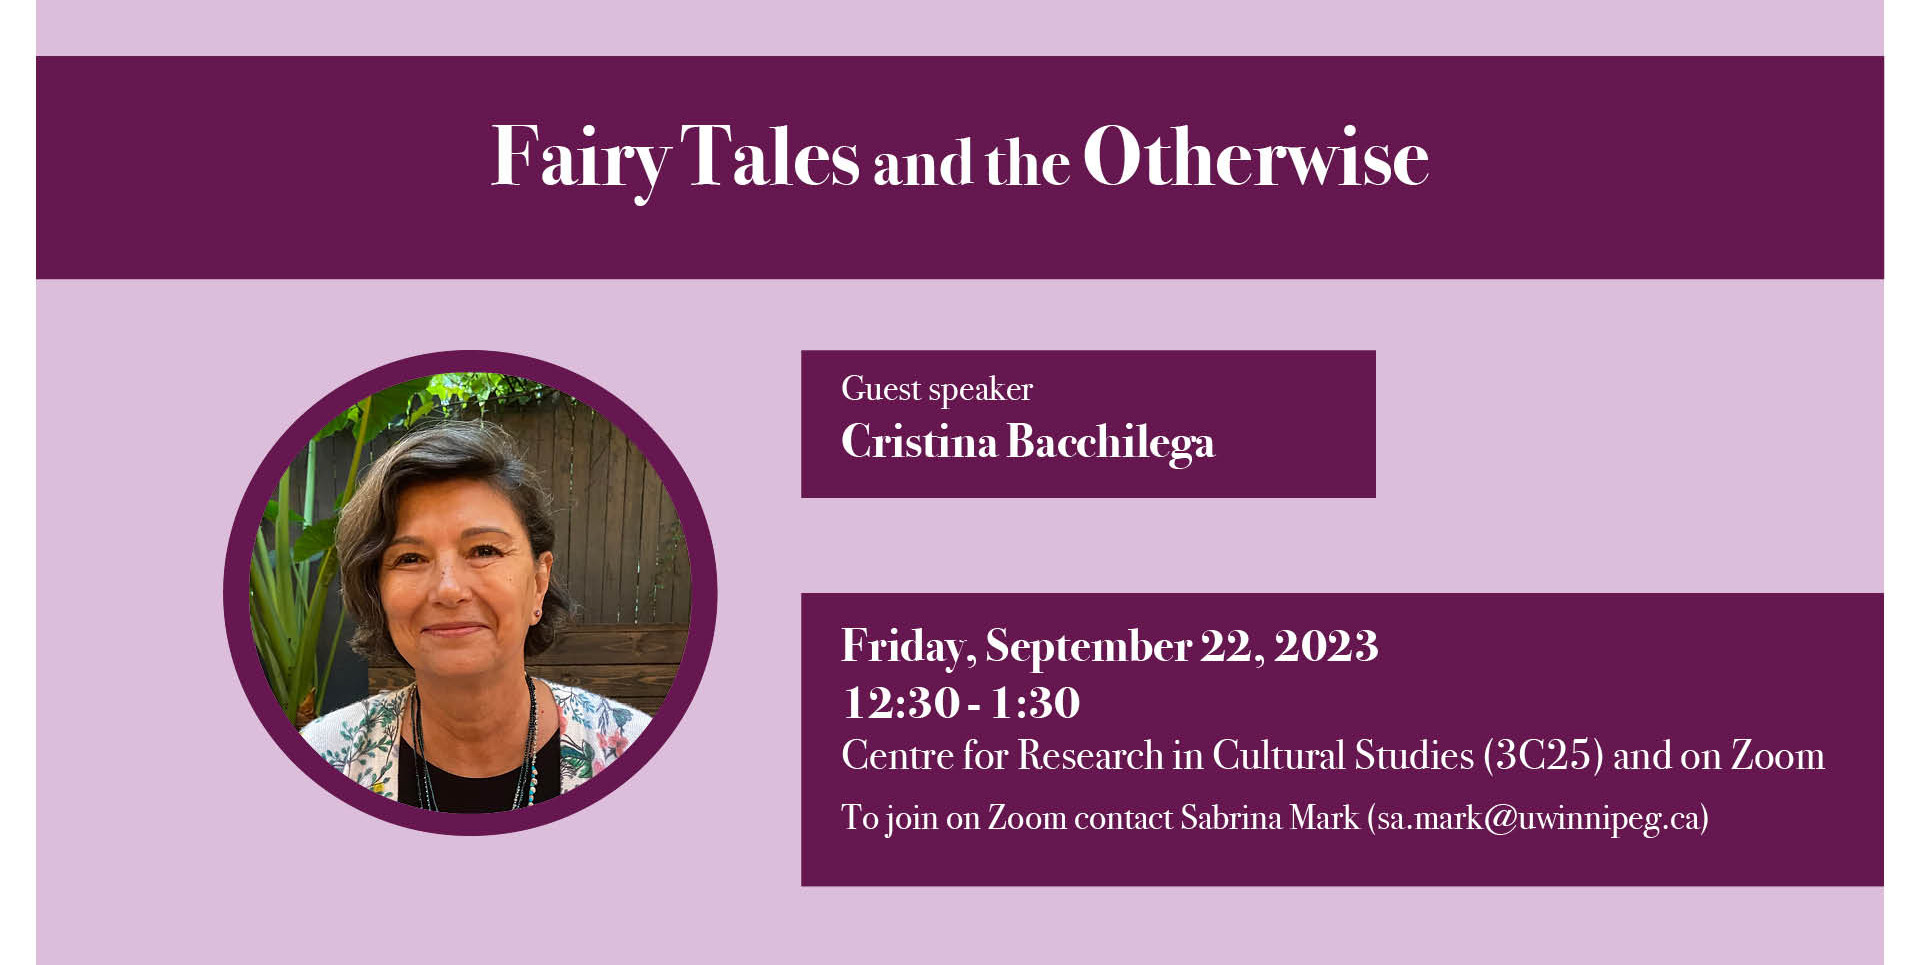 Cristina Bacchilega, Fairy Tales and the Otherwise